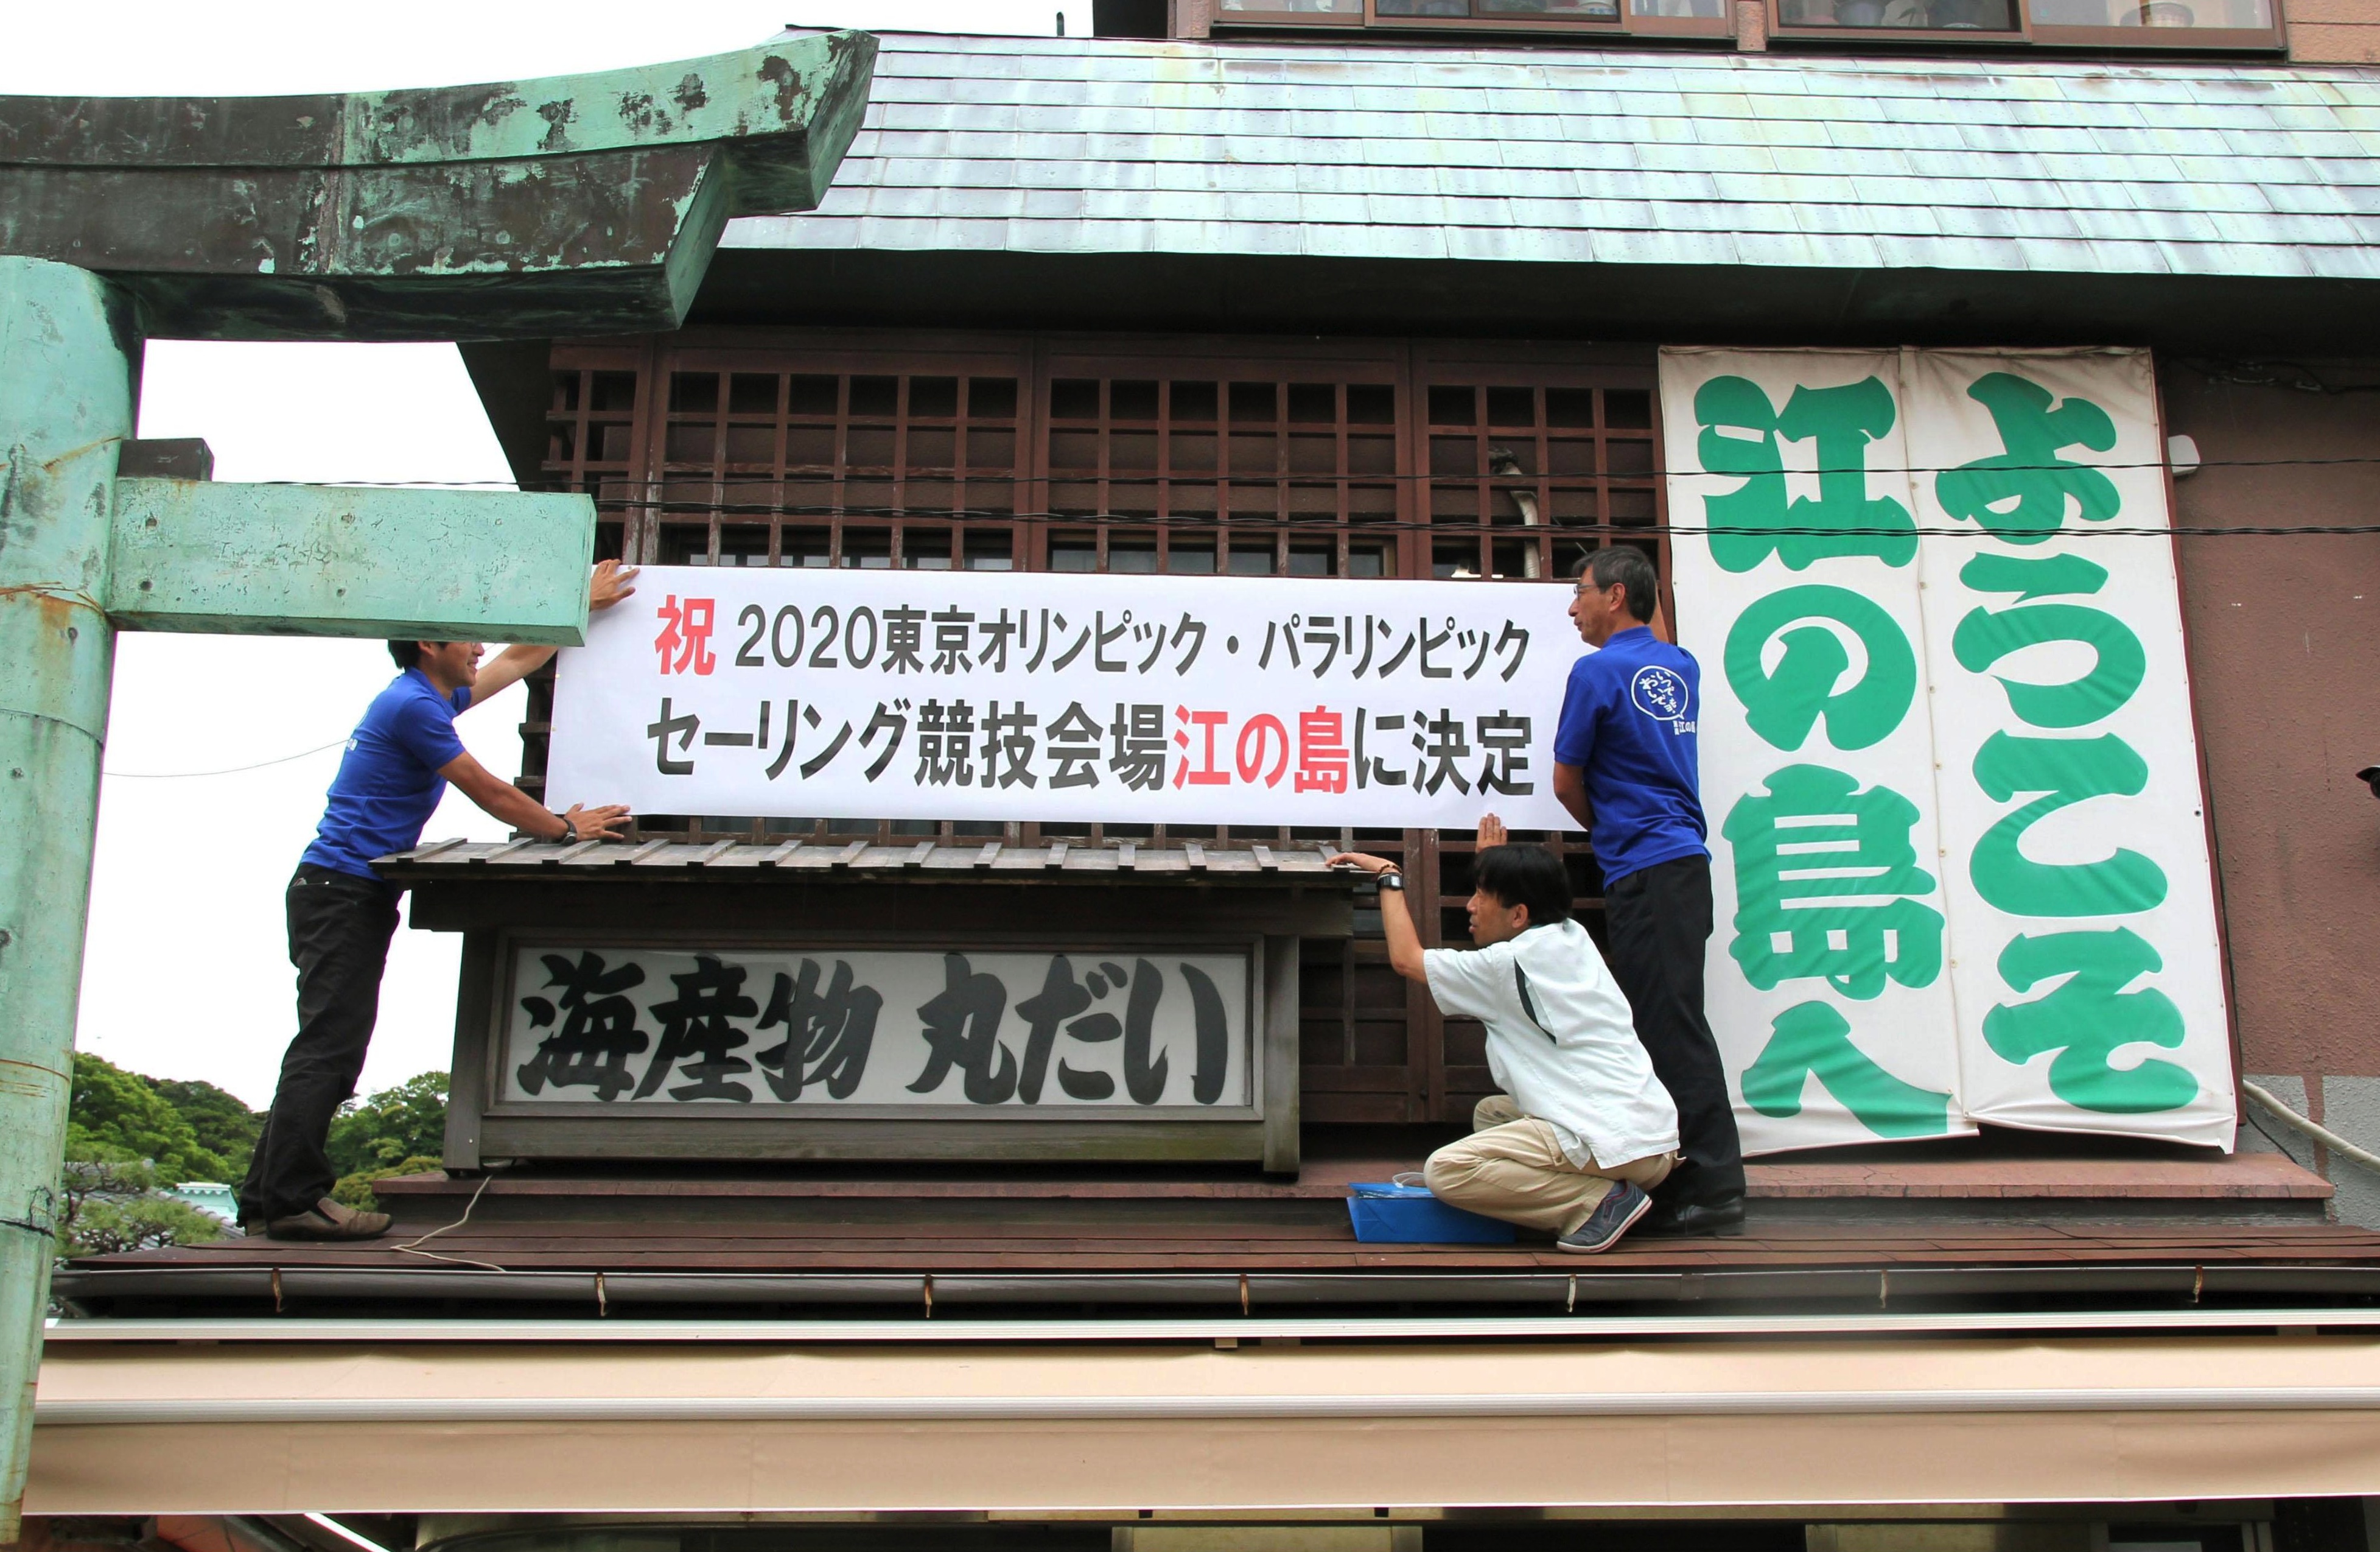 Workers hang a banner Tuesday on a building on Enoshima off Fujisawa, Kanagawa Prefecture, celebrating the island's choice to host the sailing events in the 2020 Tokyo Olympics. | KYODO